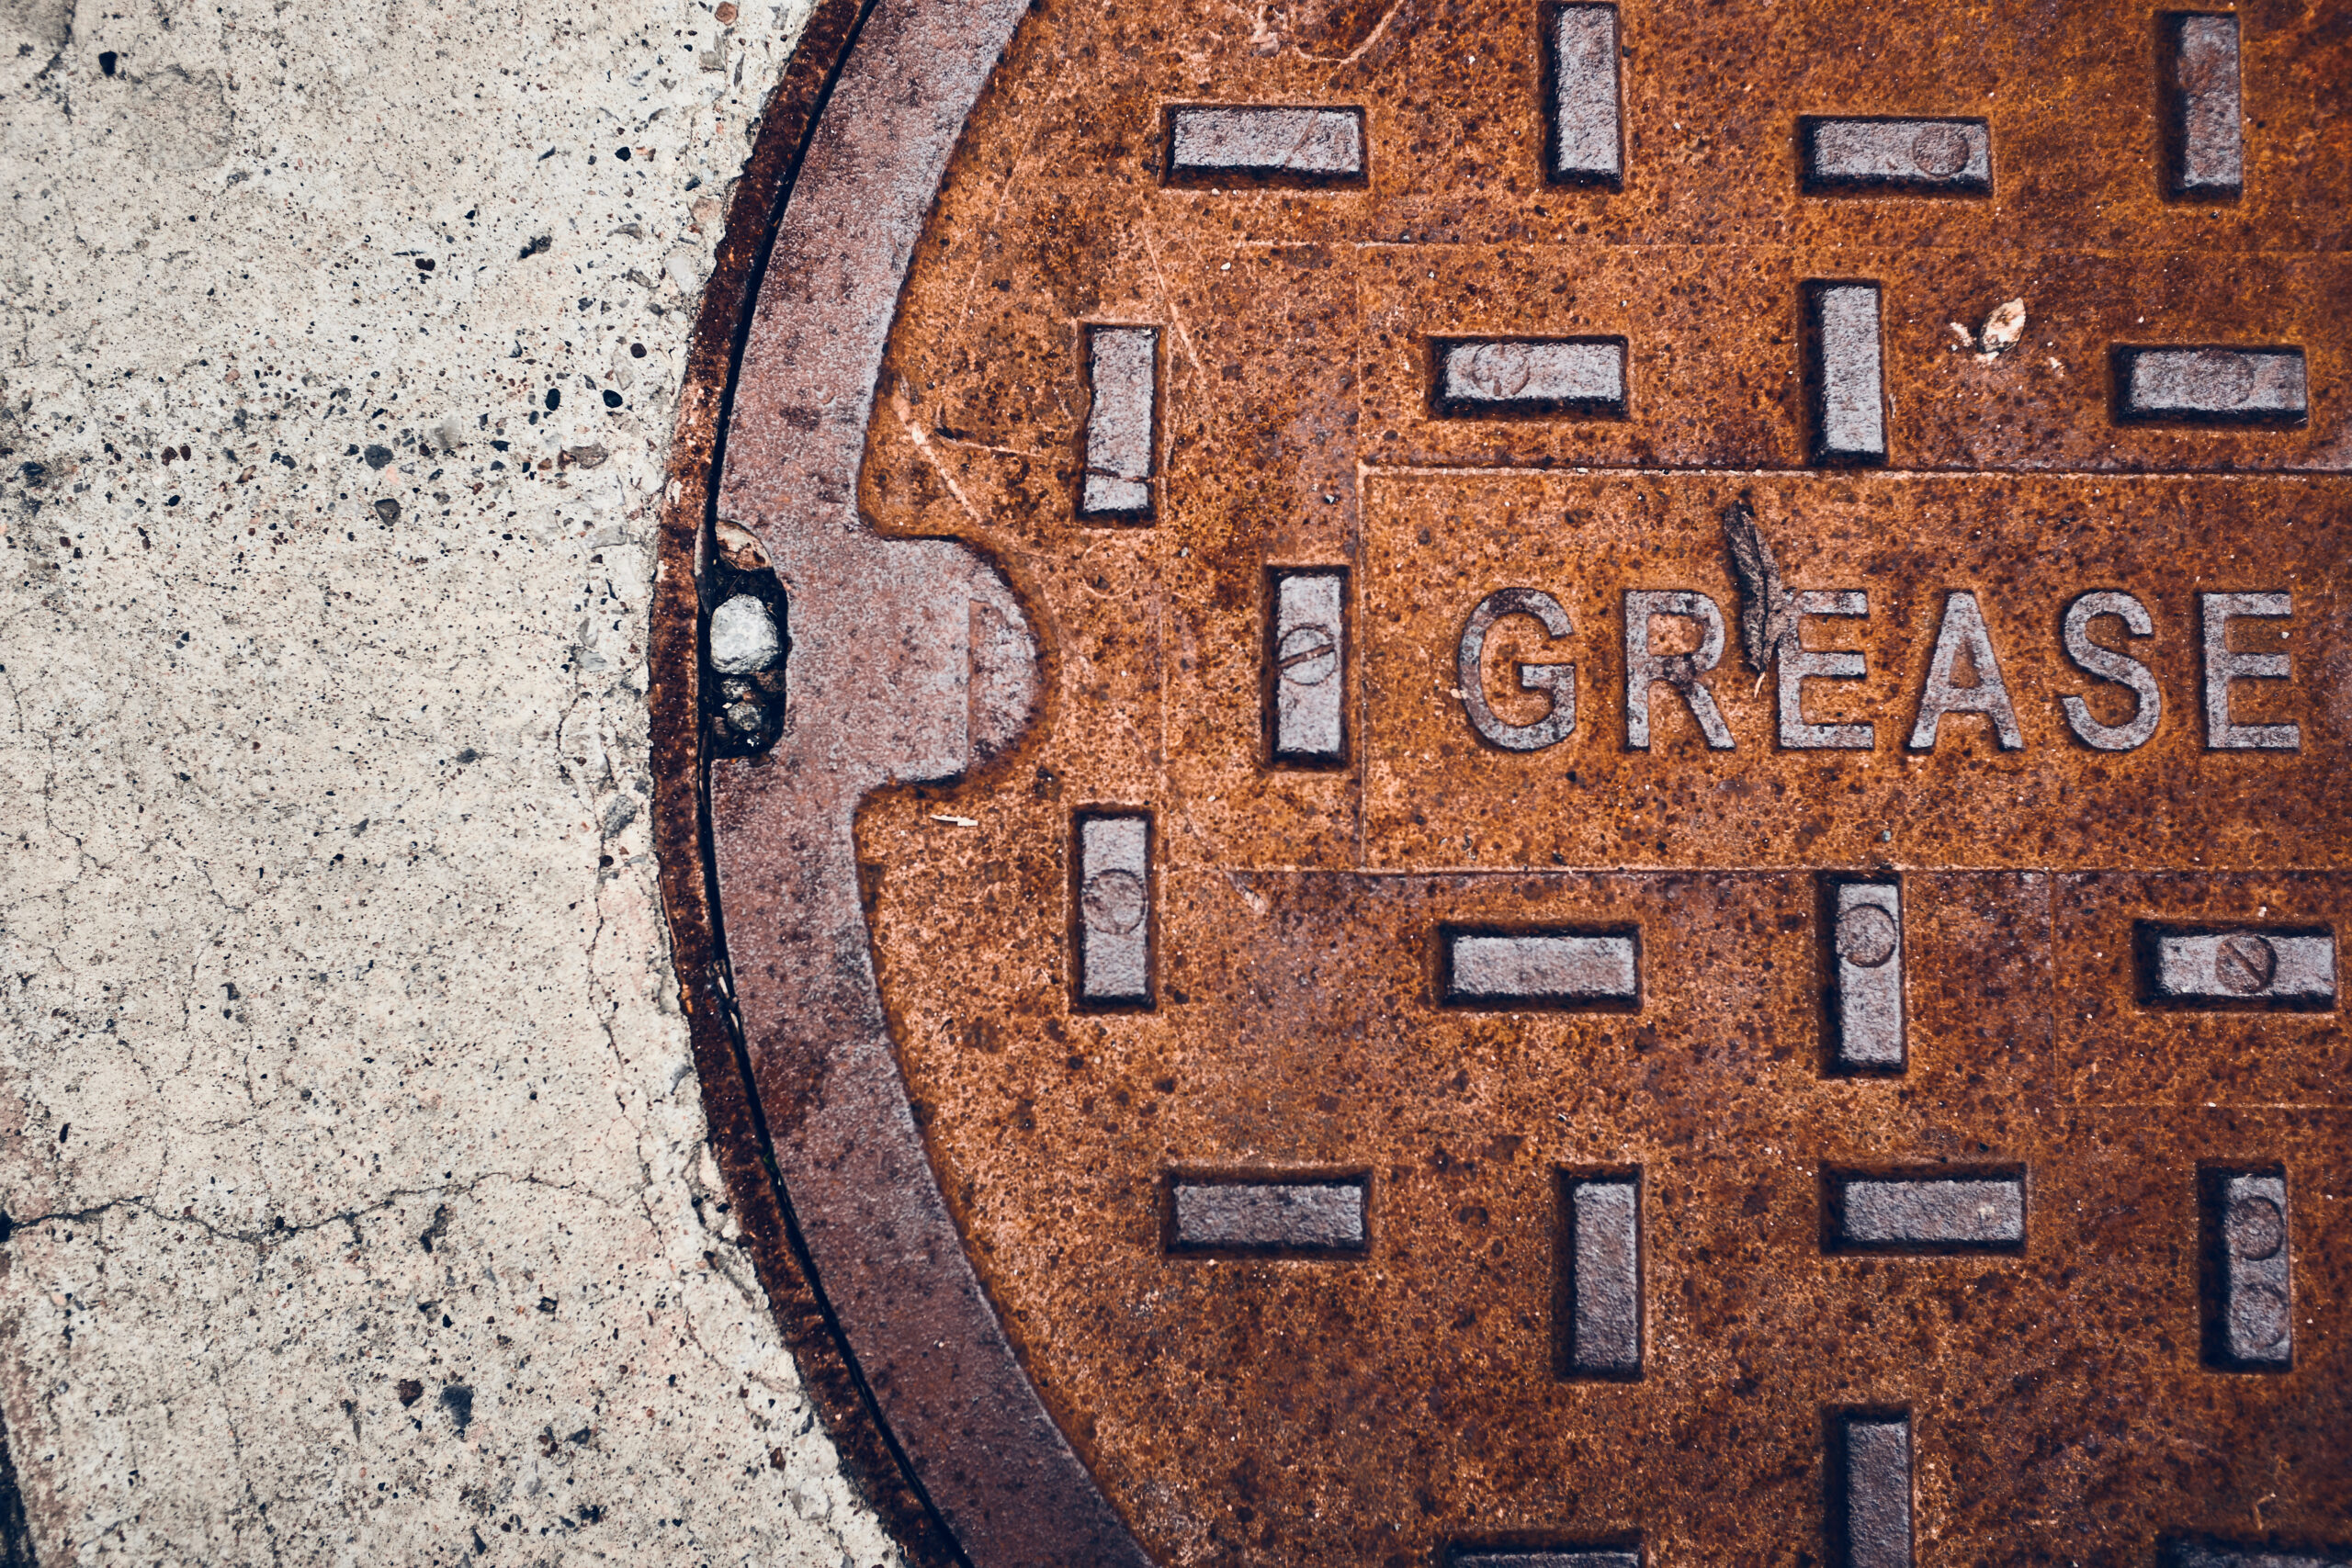 Signs Your Grease Trap Needs Cleaning